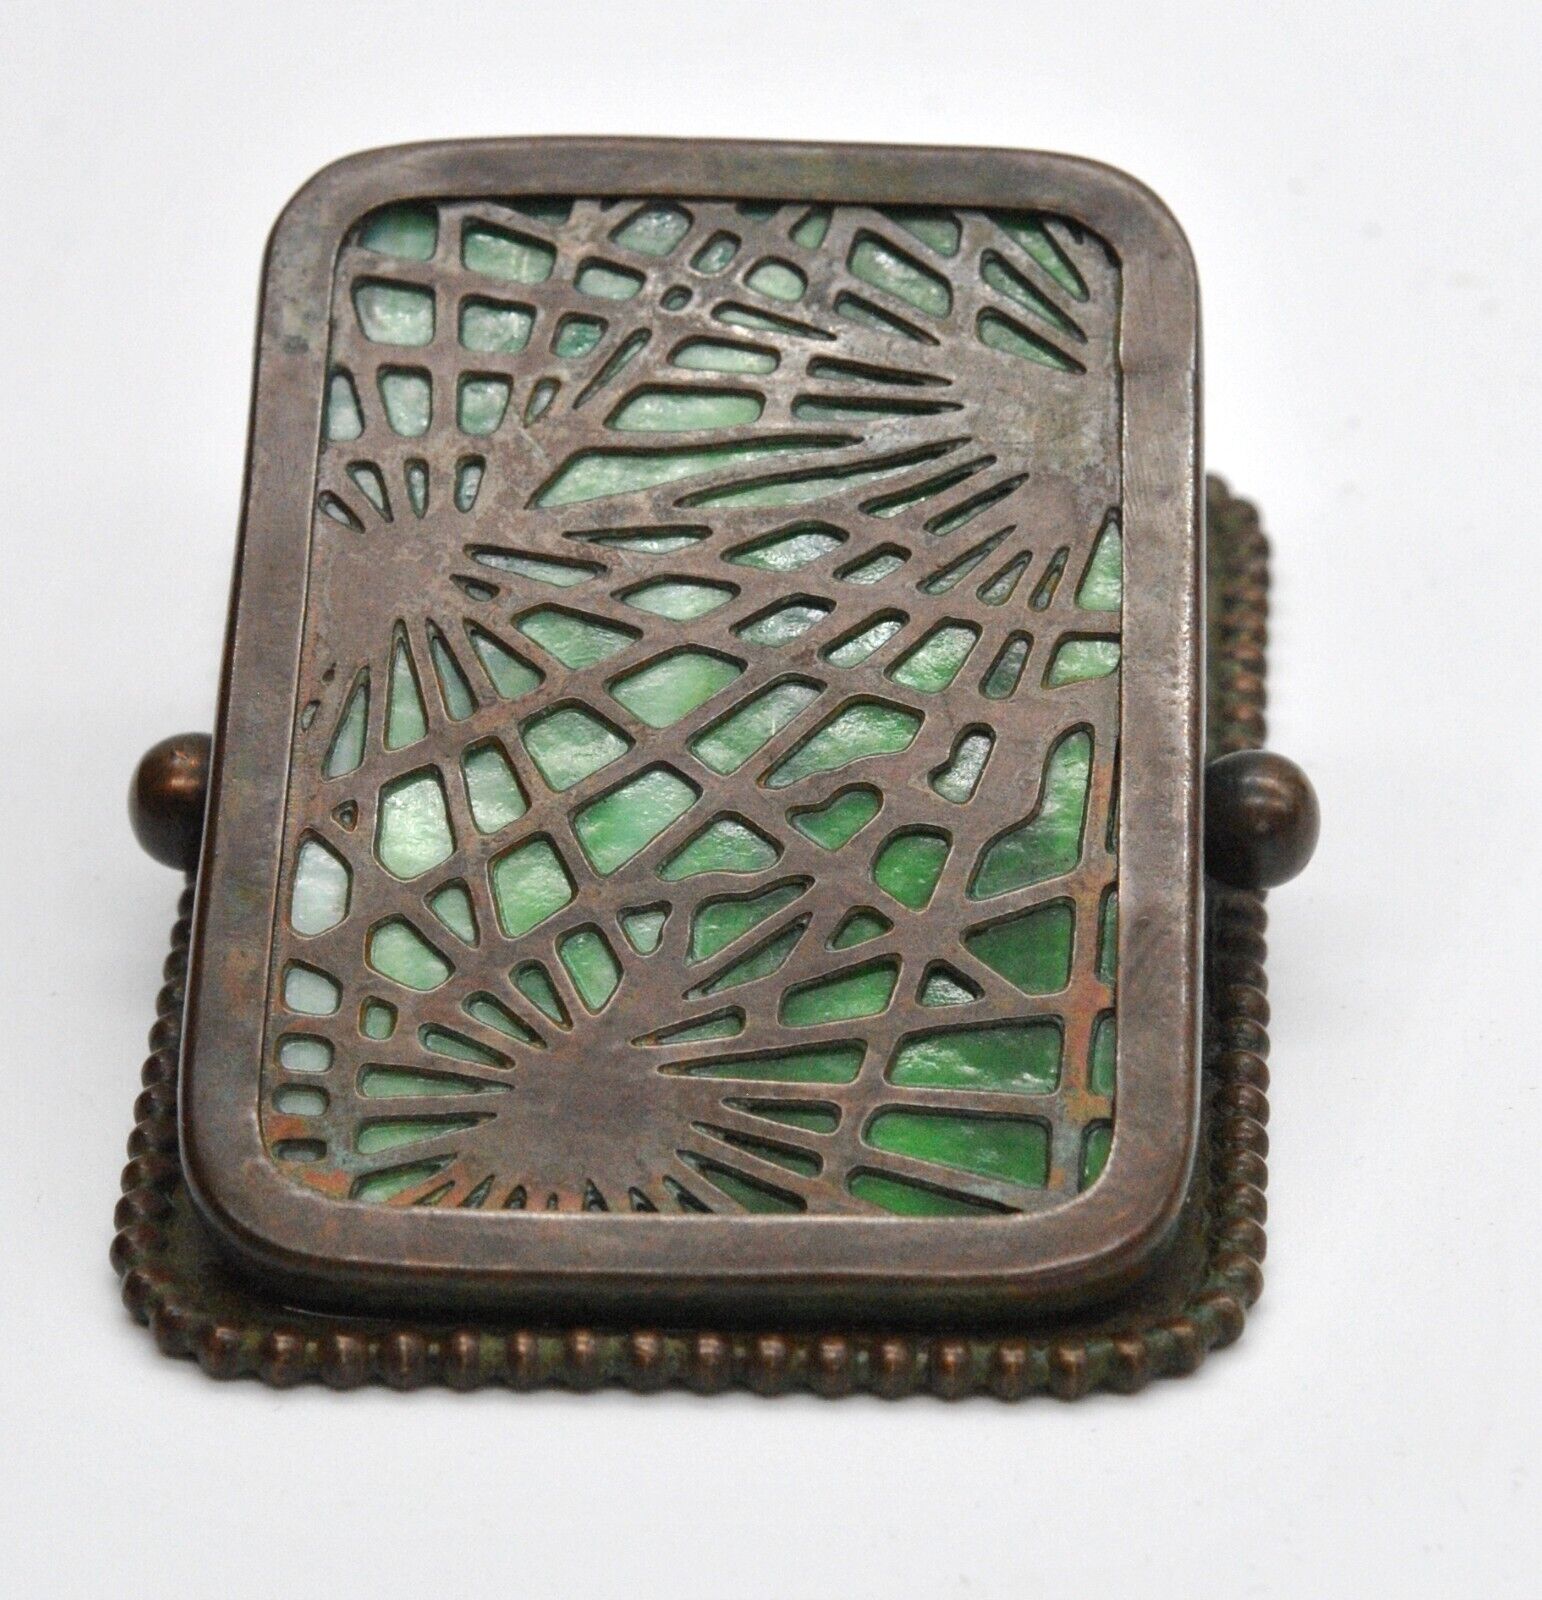 TIFFANY STUDIOS PINE NEEDLE PAPER CLIP # 971 GREEN FAVRILE CHOCOLATE BROWN EXC.